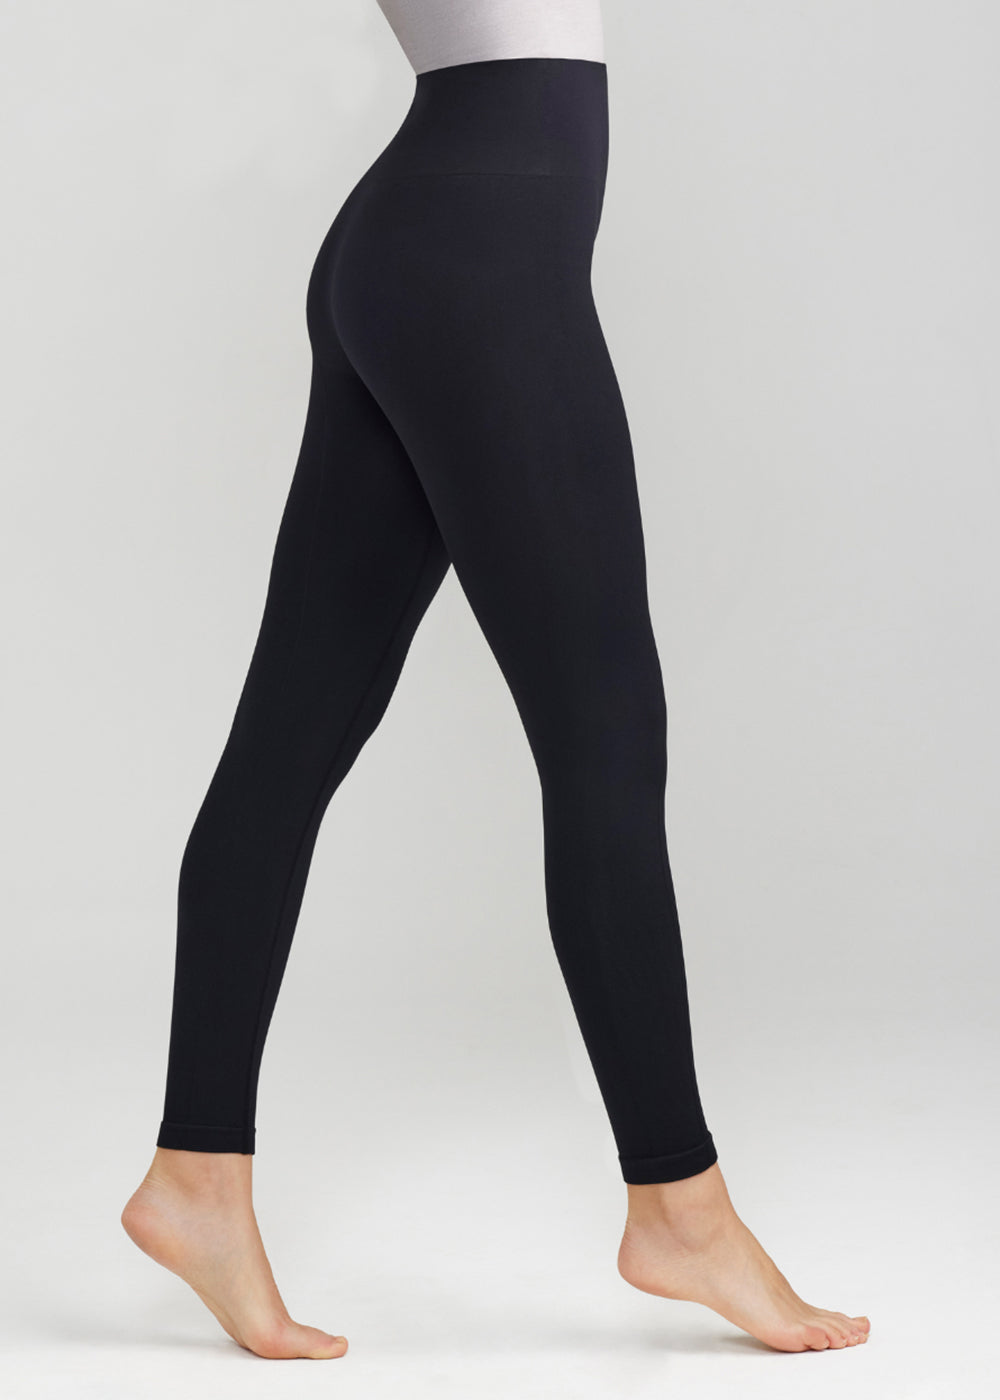 Seamless Shaping Legging from Yummie in Black  - 1